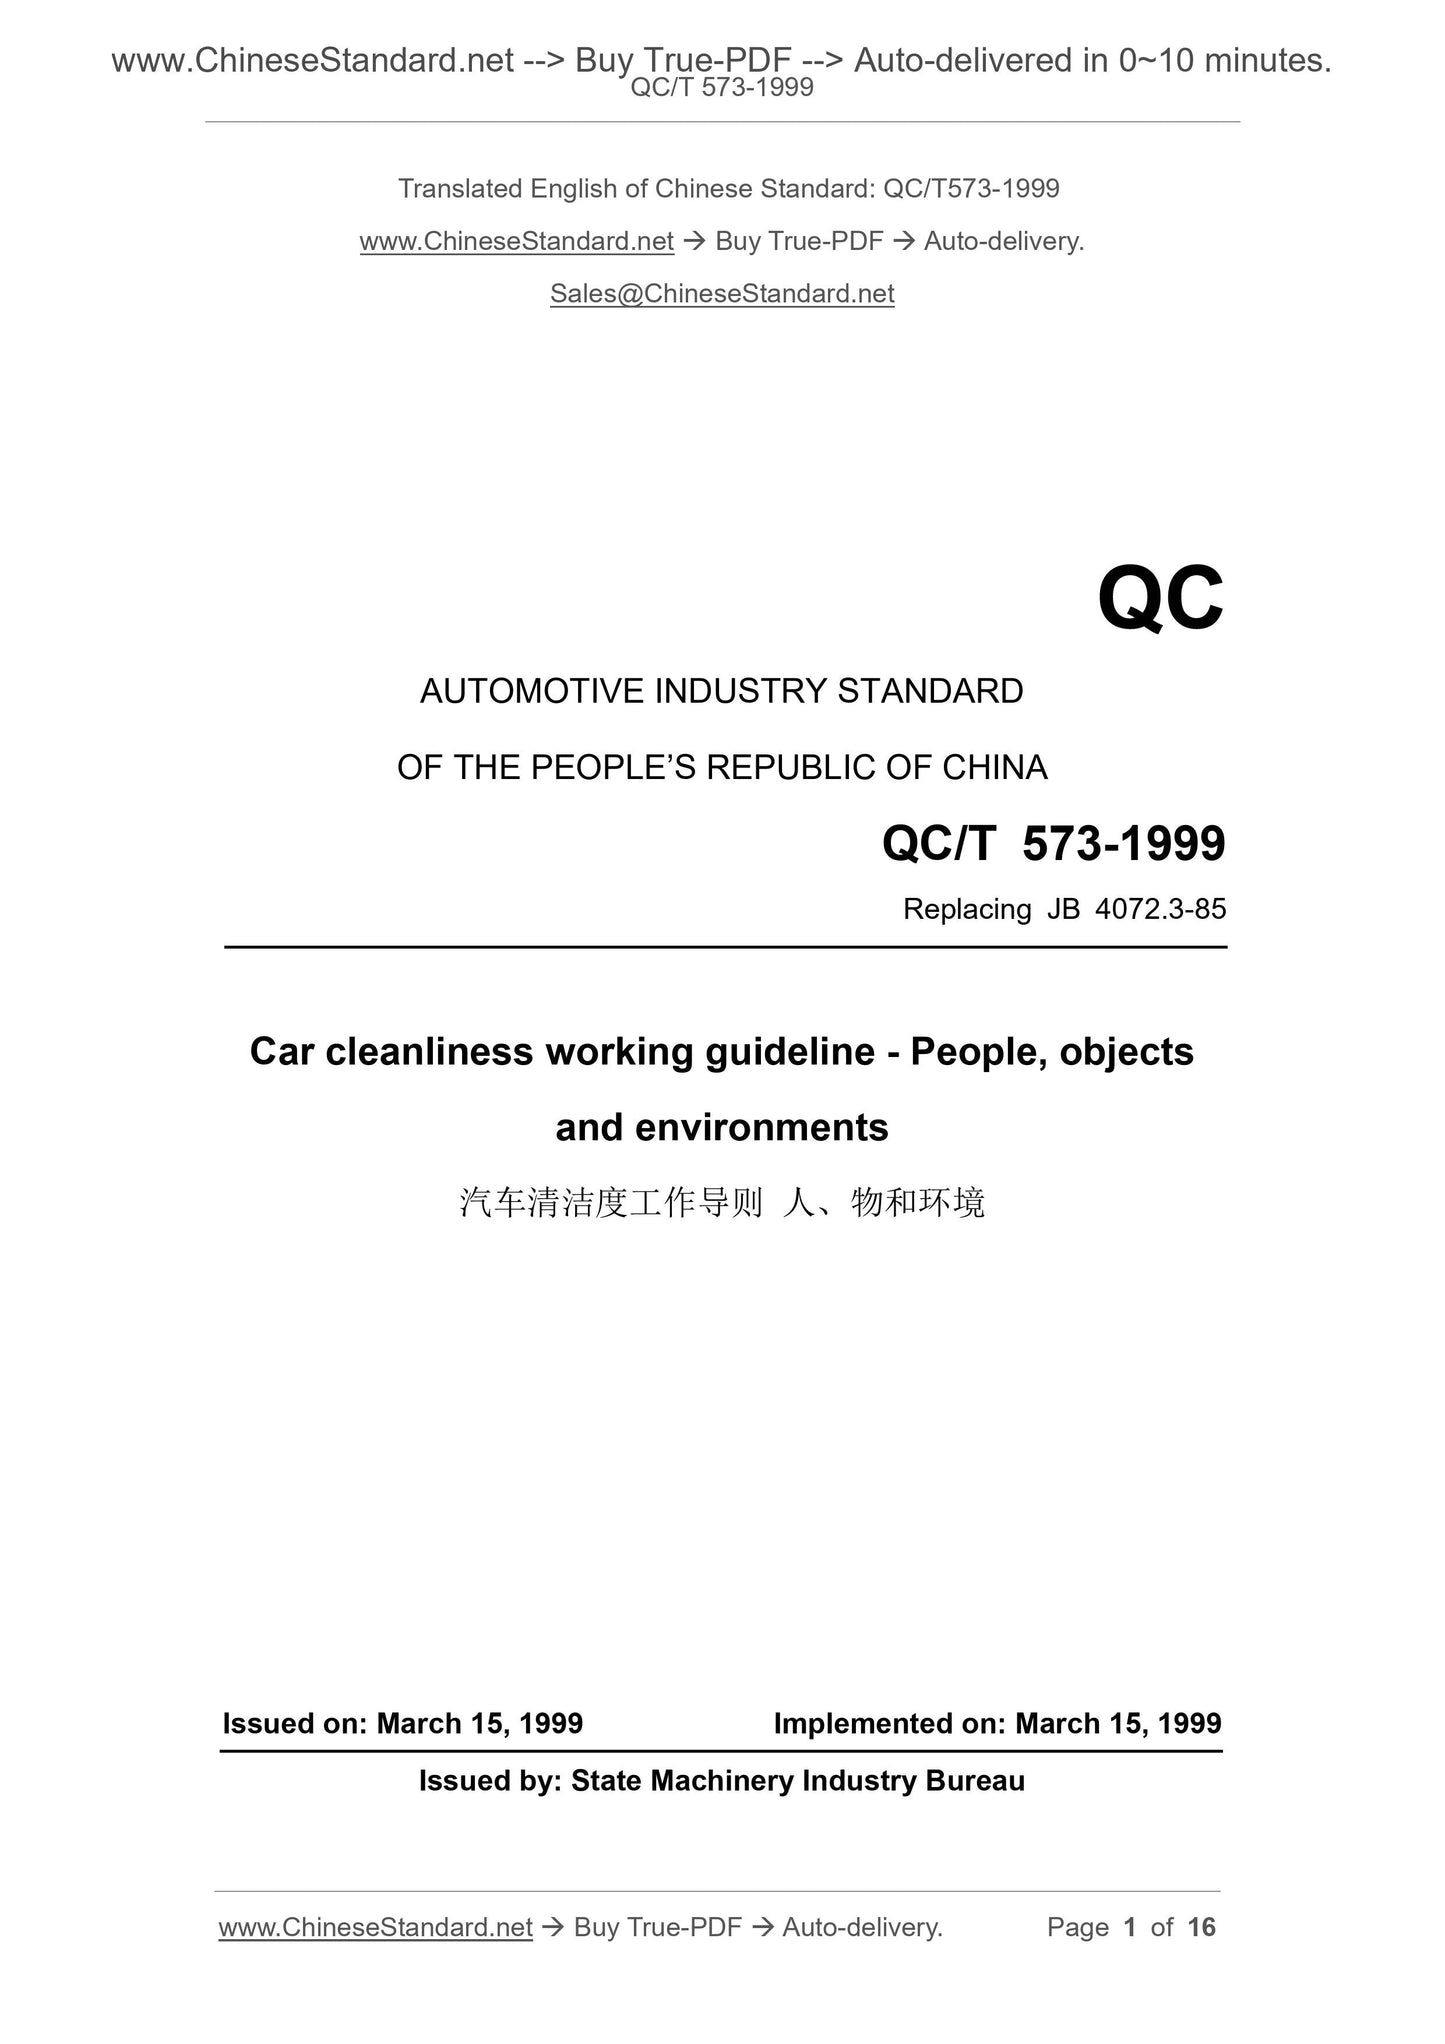 QC/T 573-1999 Page 1